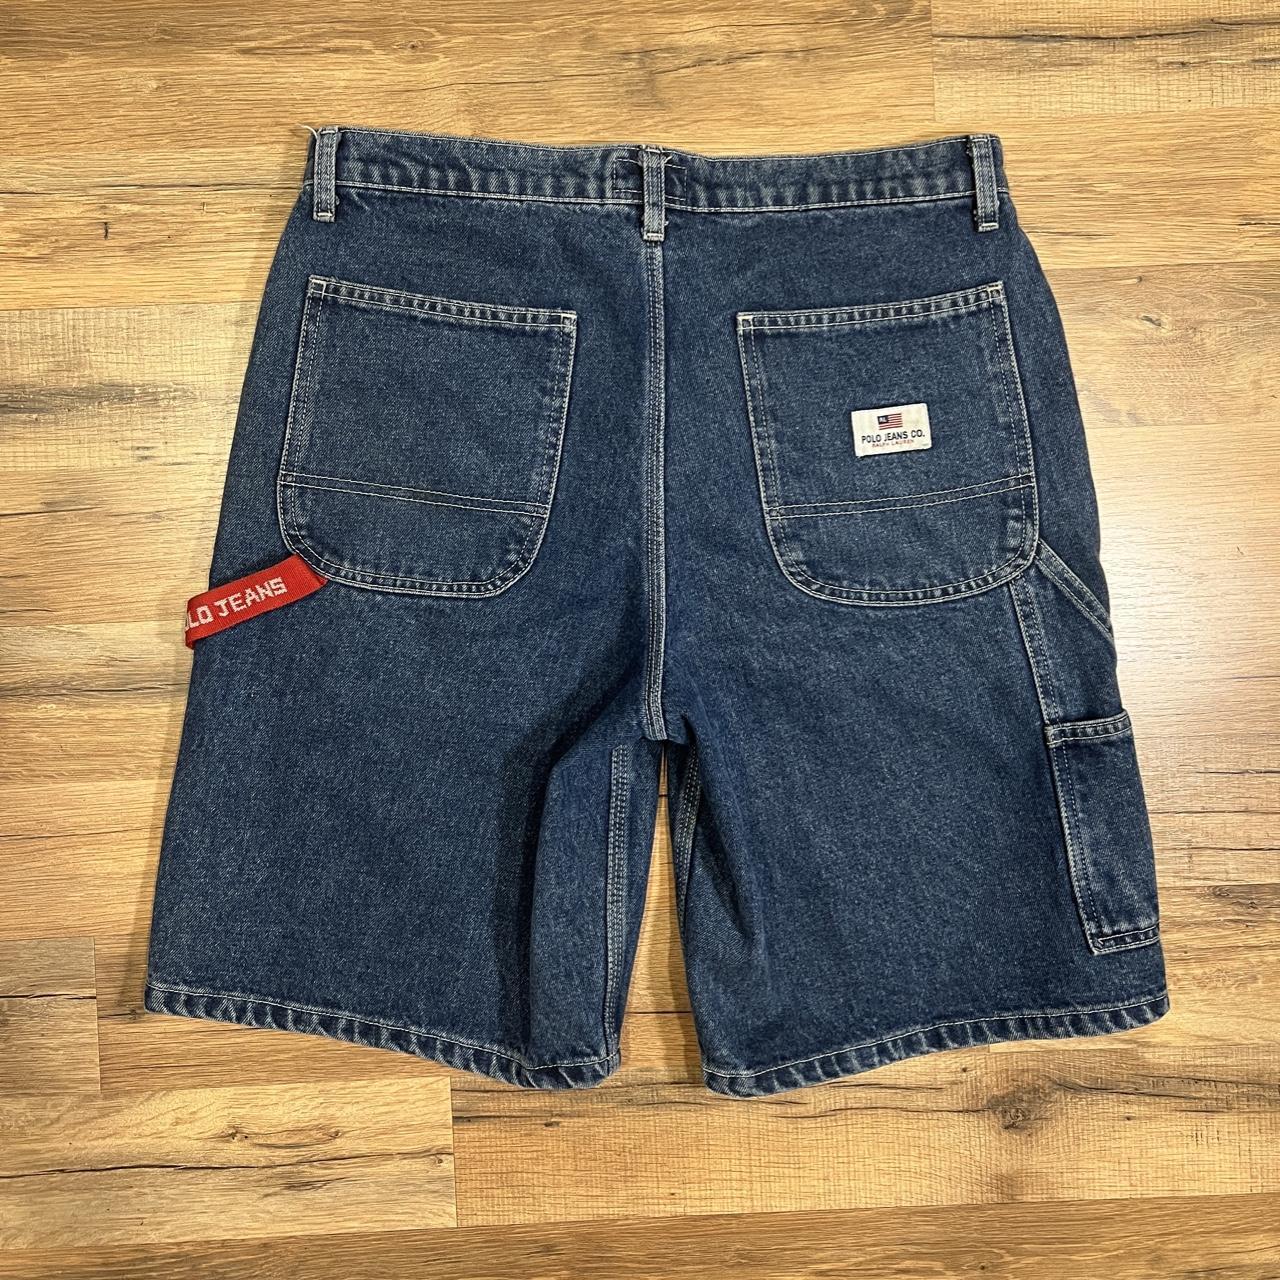 Early 2000s polo jeans carpenter jorts. No flaws... - Depop